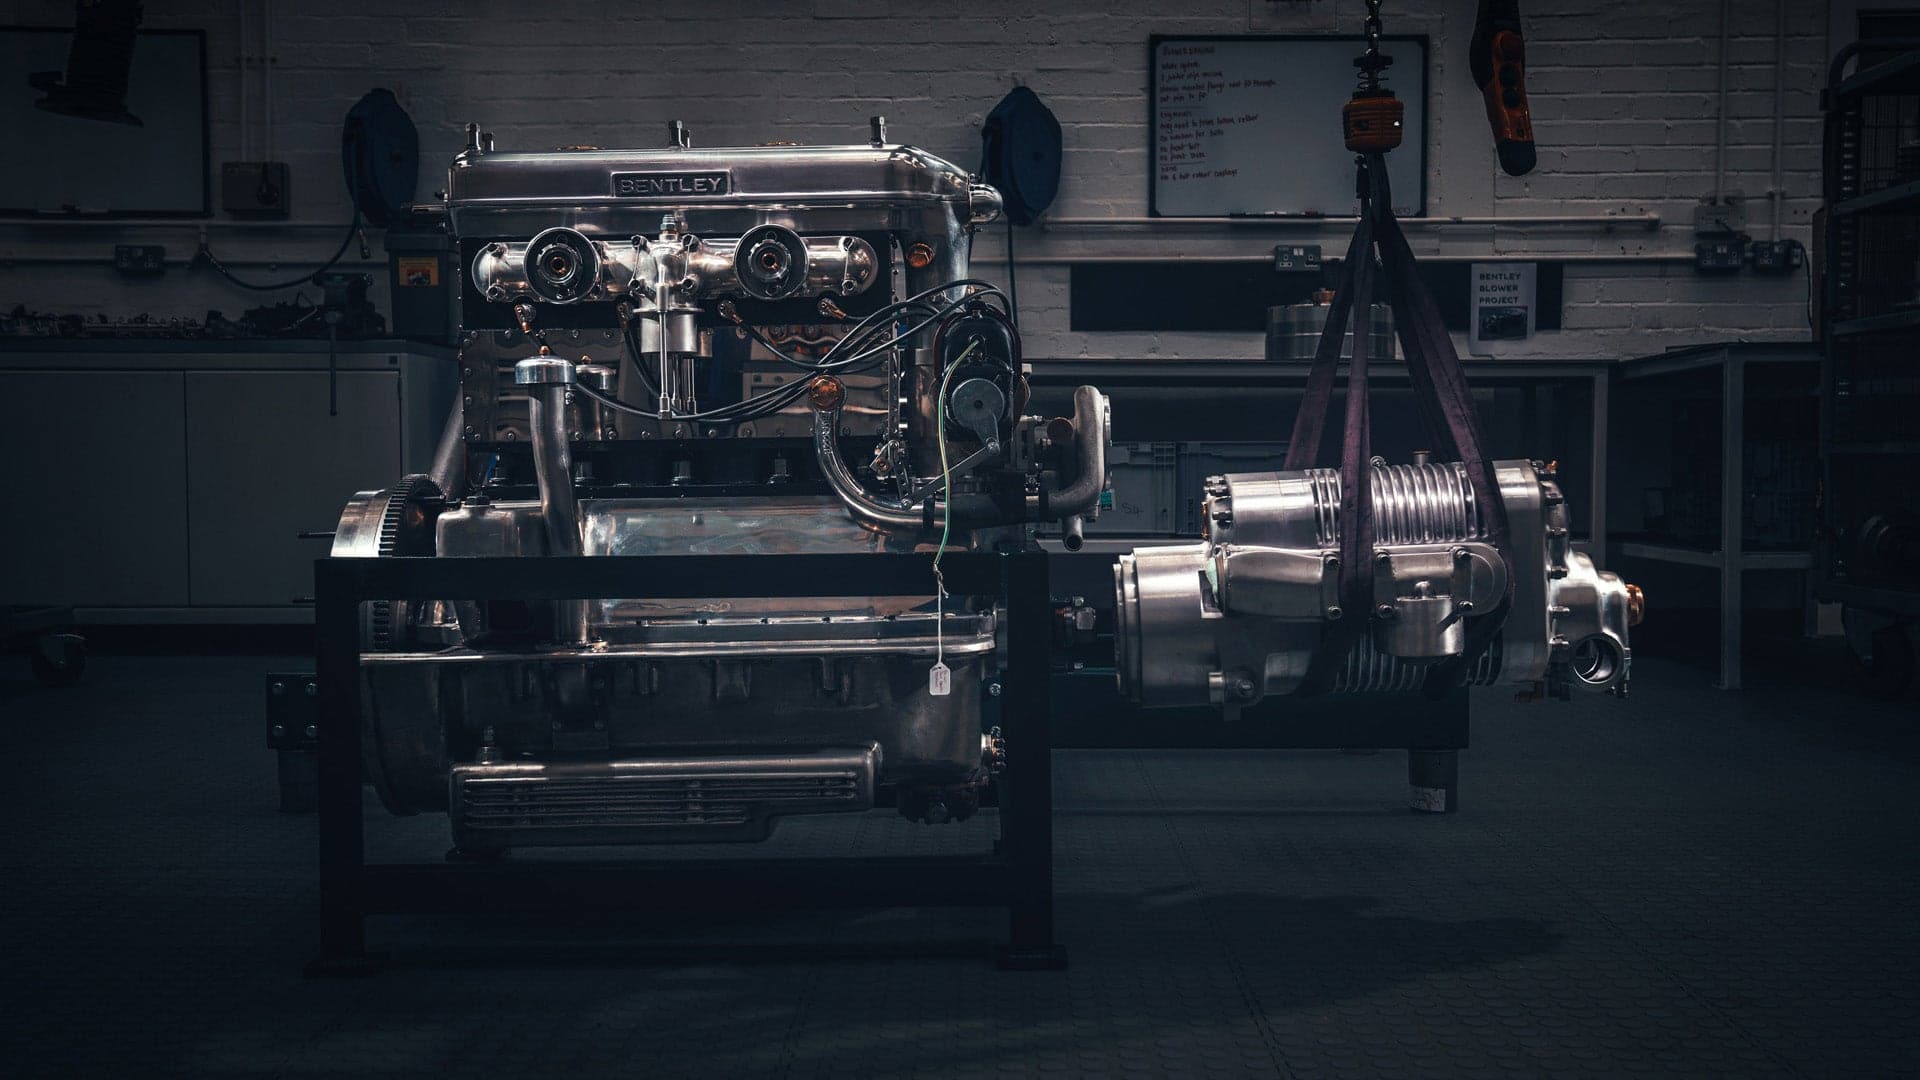 The Handmade Parts for Bentley’s 1929 Blower Continuation Prototype Look Fantastic Already